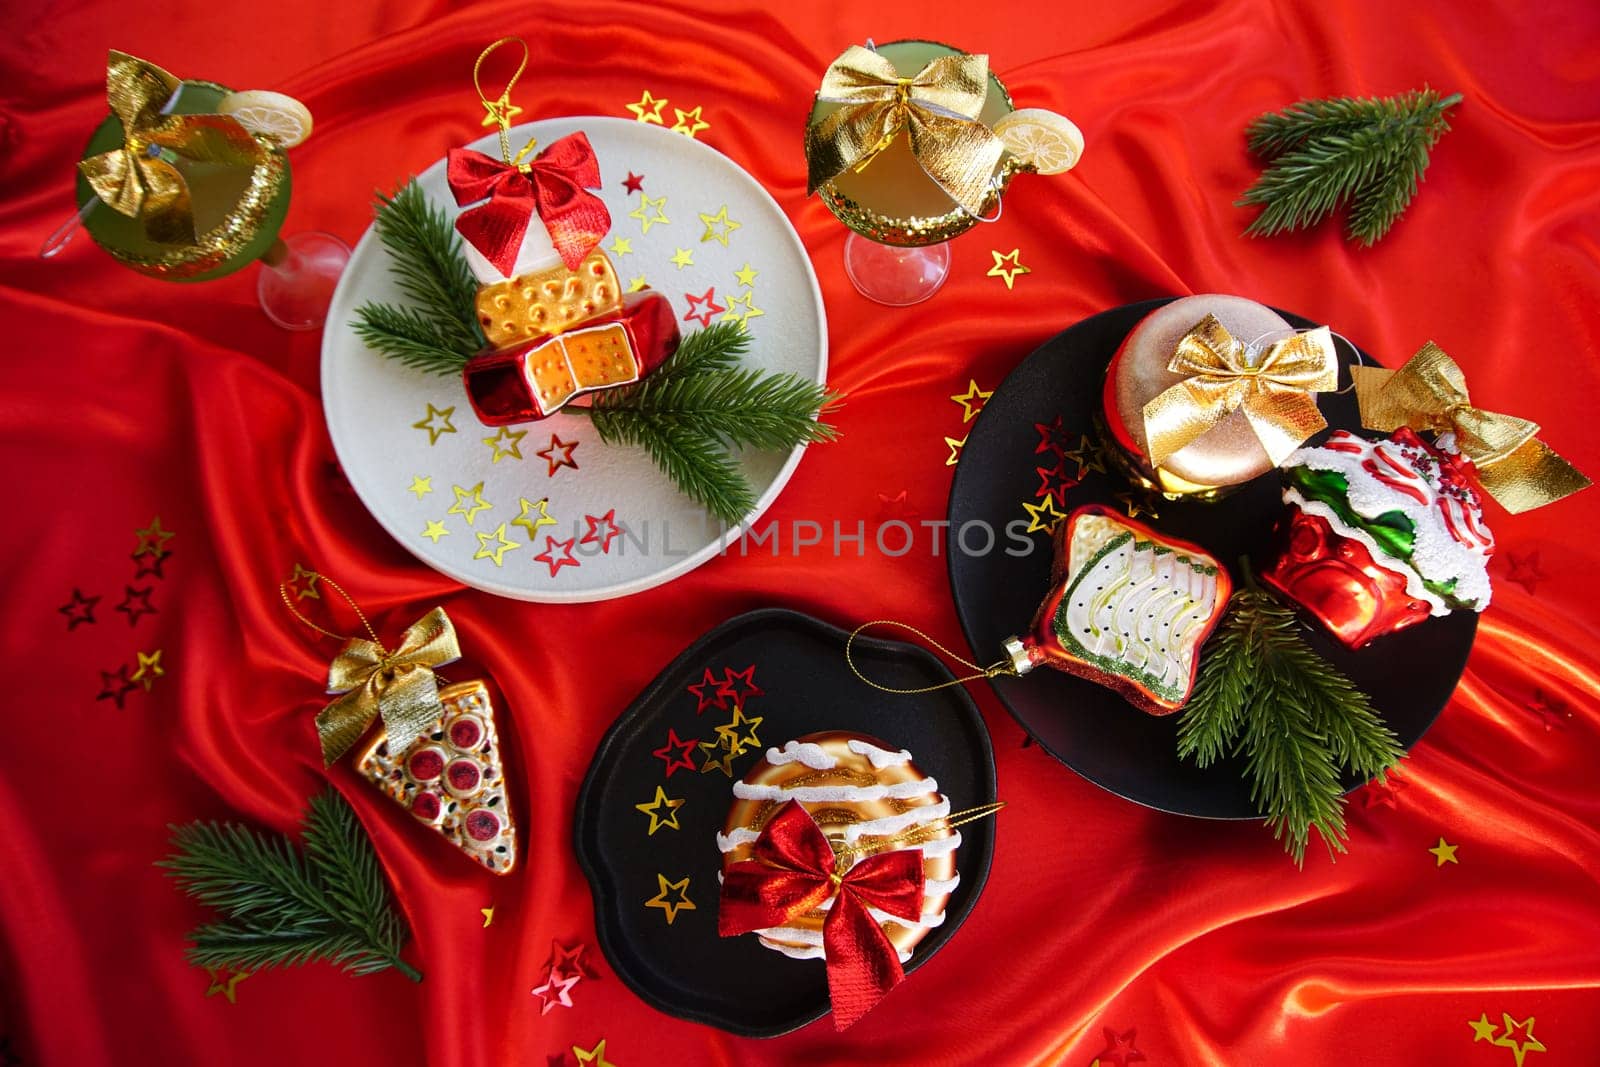 New Year's desserts. Creative table setting with Christmas tree toys. Plates with Christmas toys are placed on a red satin tablecloth.